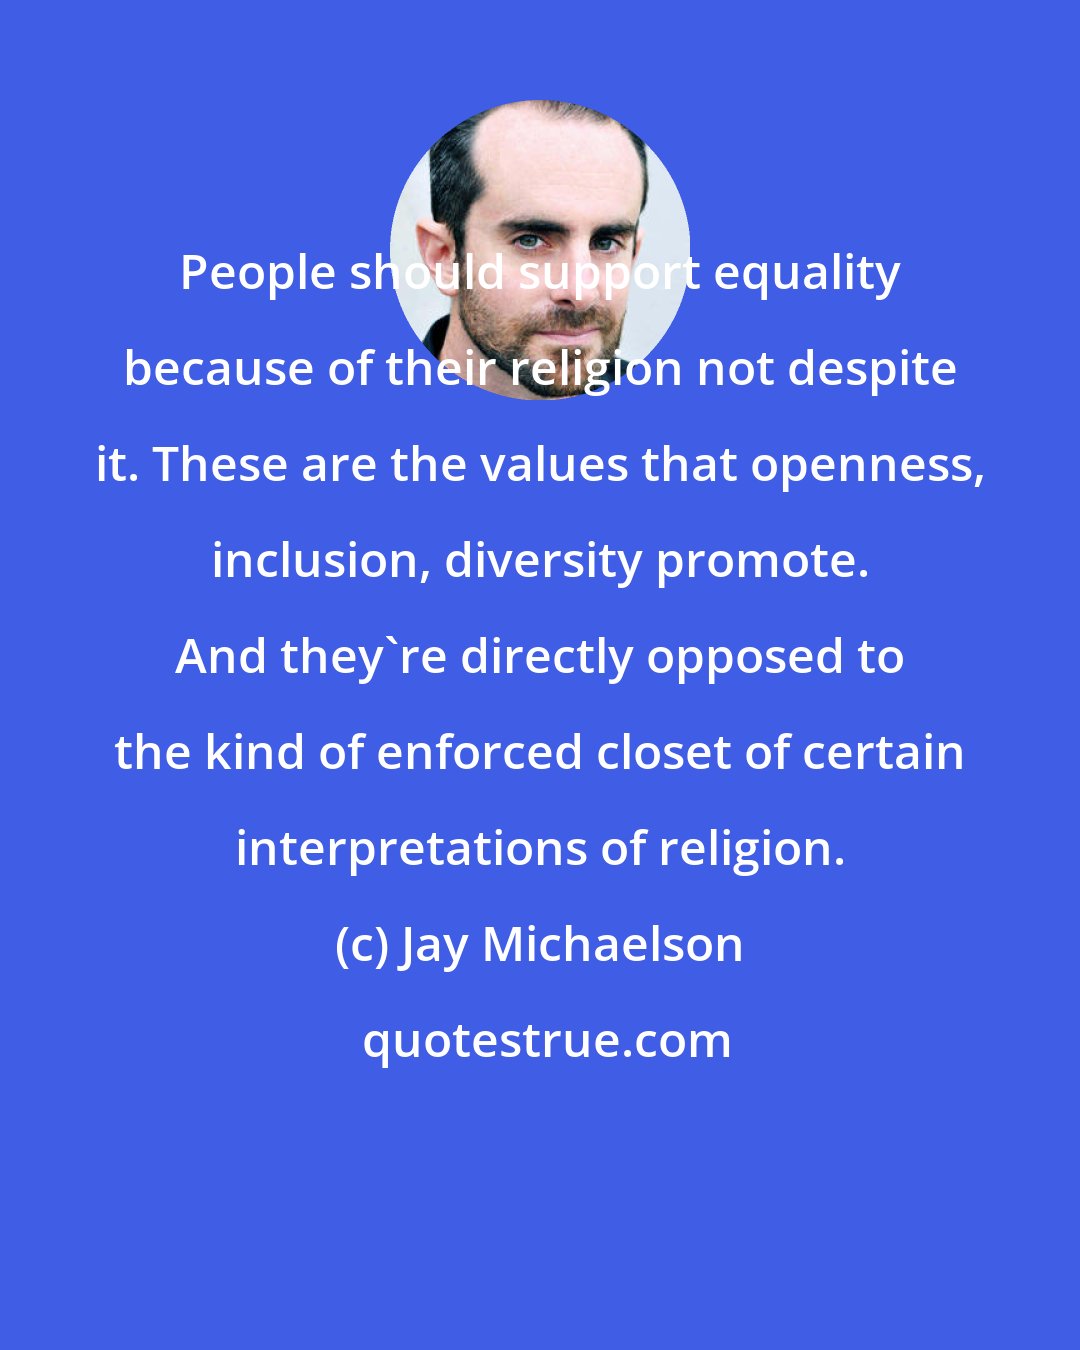 Jay Michaelson: People should support equality because of their religion not despite it. These are the values that openness, inclusion, diversity promote. And they're directly opposed to the kind of enforced closet of certain interpretations of religion.